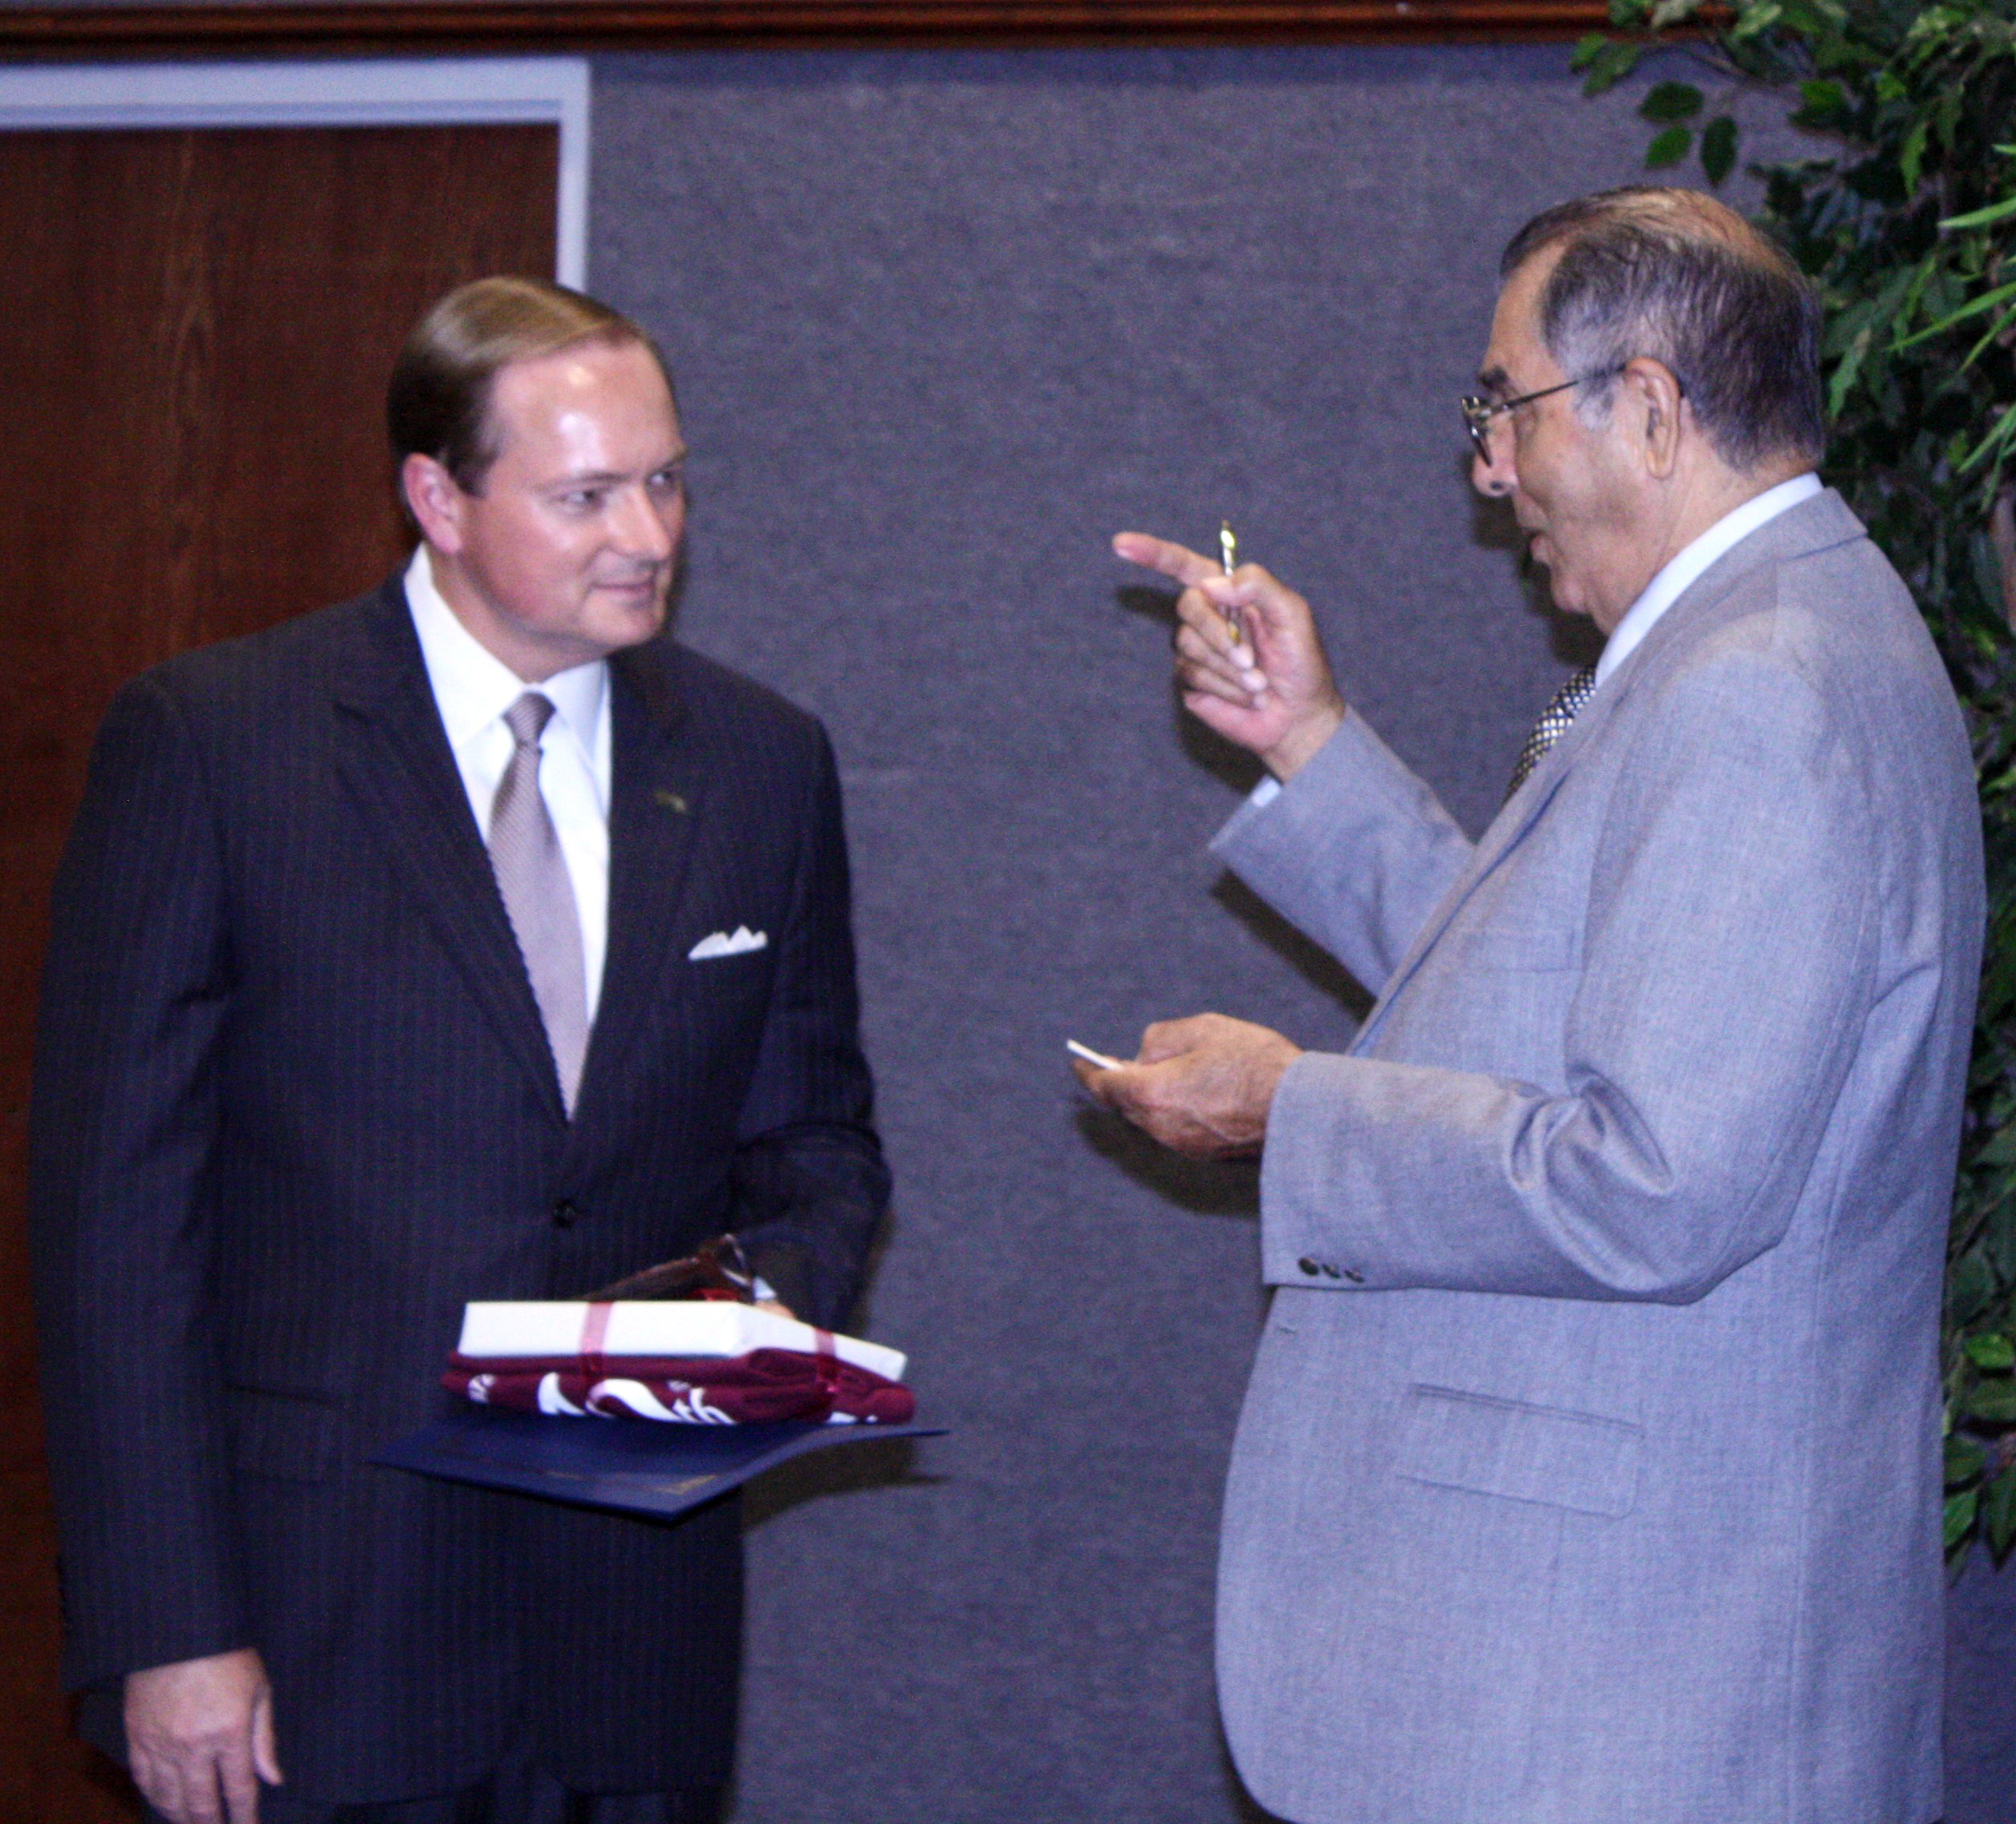 Balding middle age man wearing gray suit and maroon tie speaks with middle eastern older man with glasses